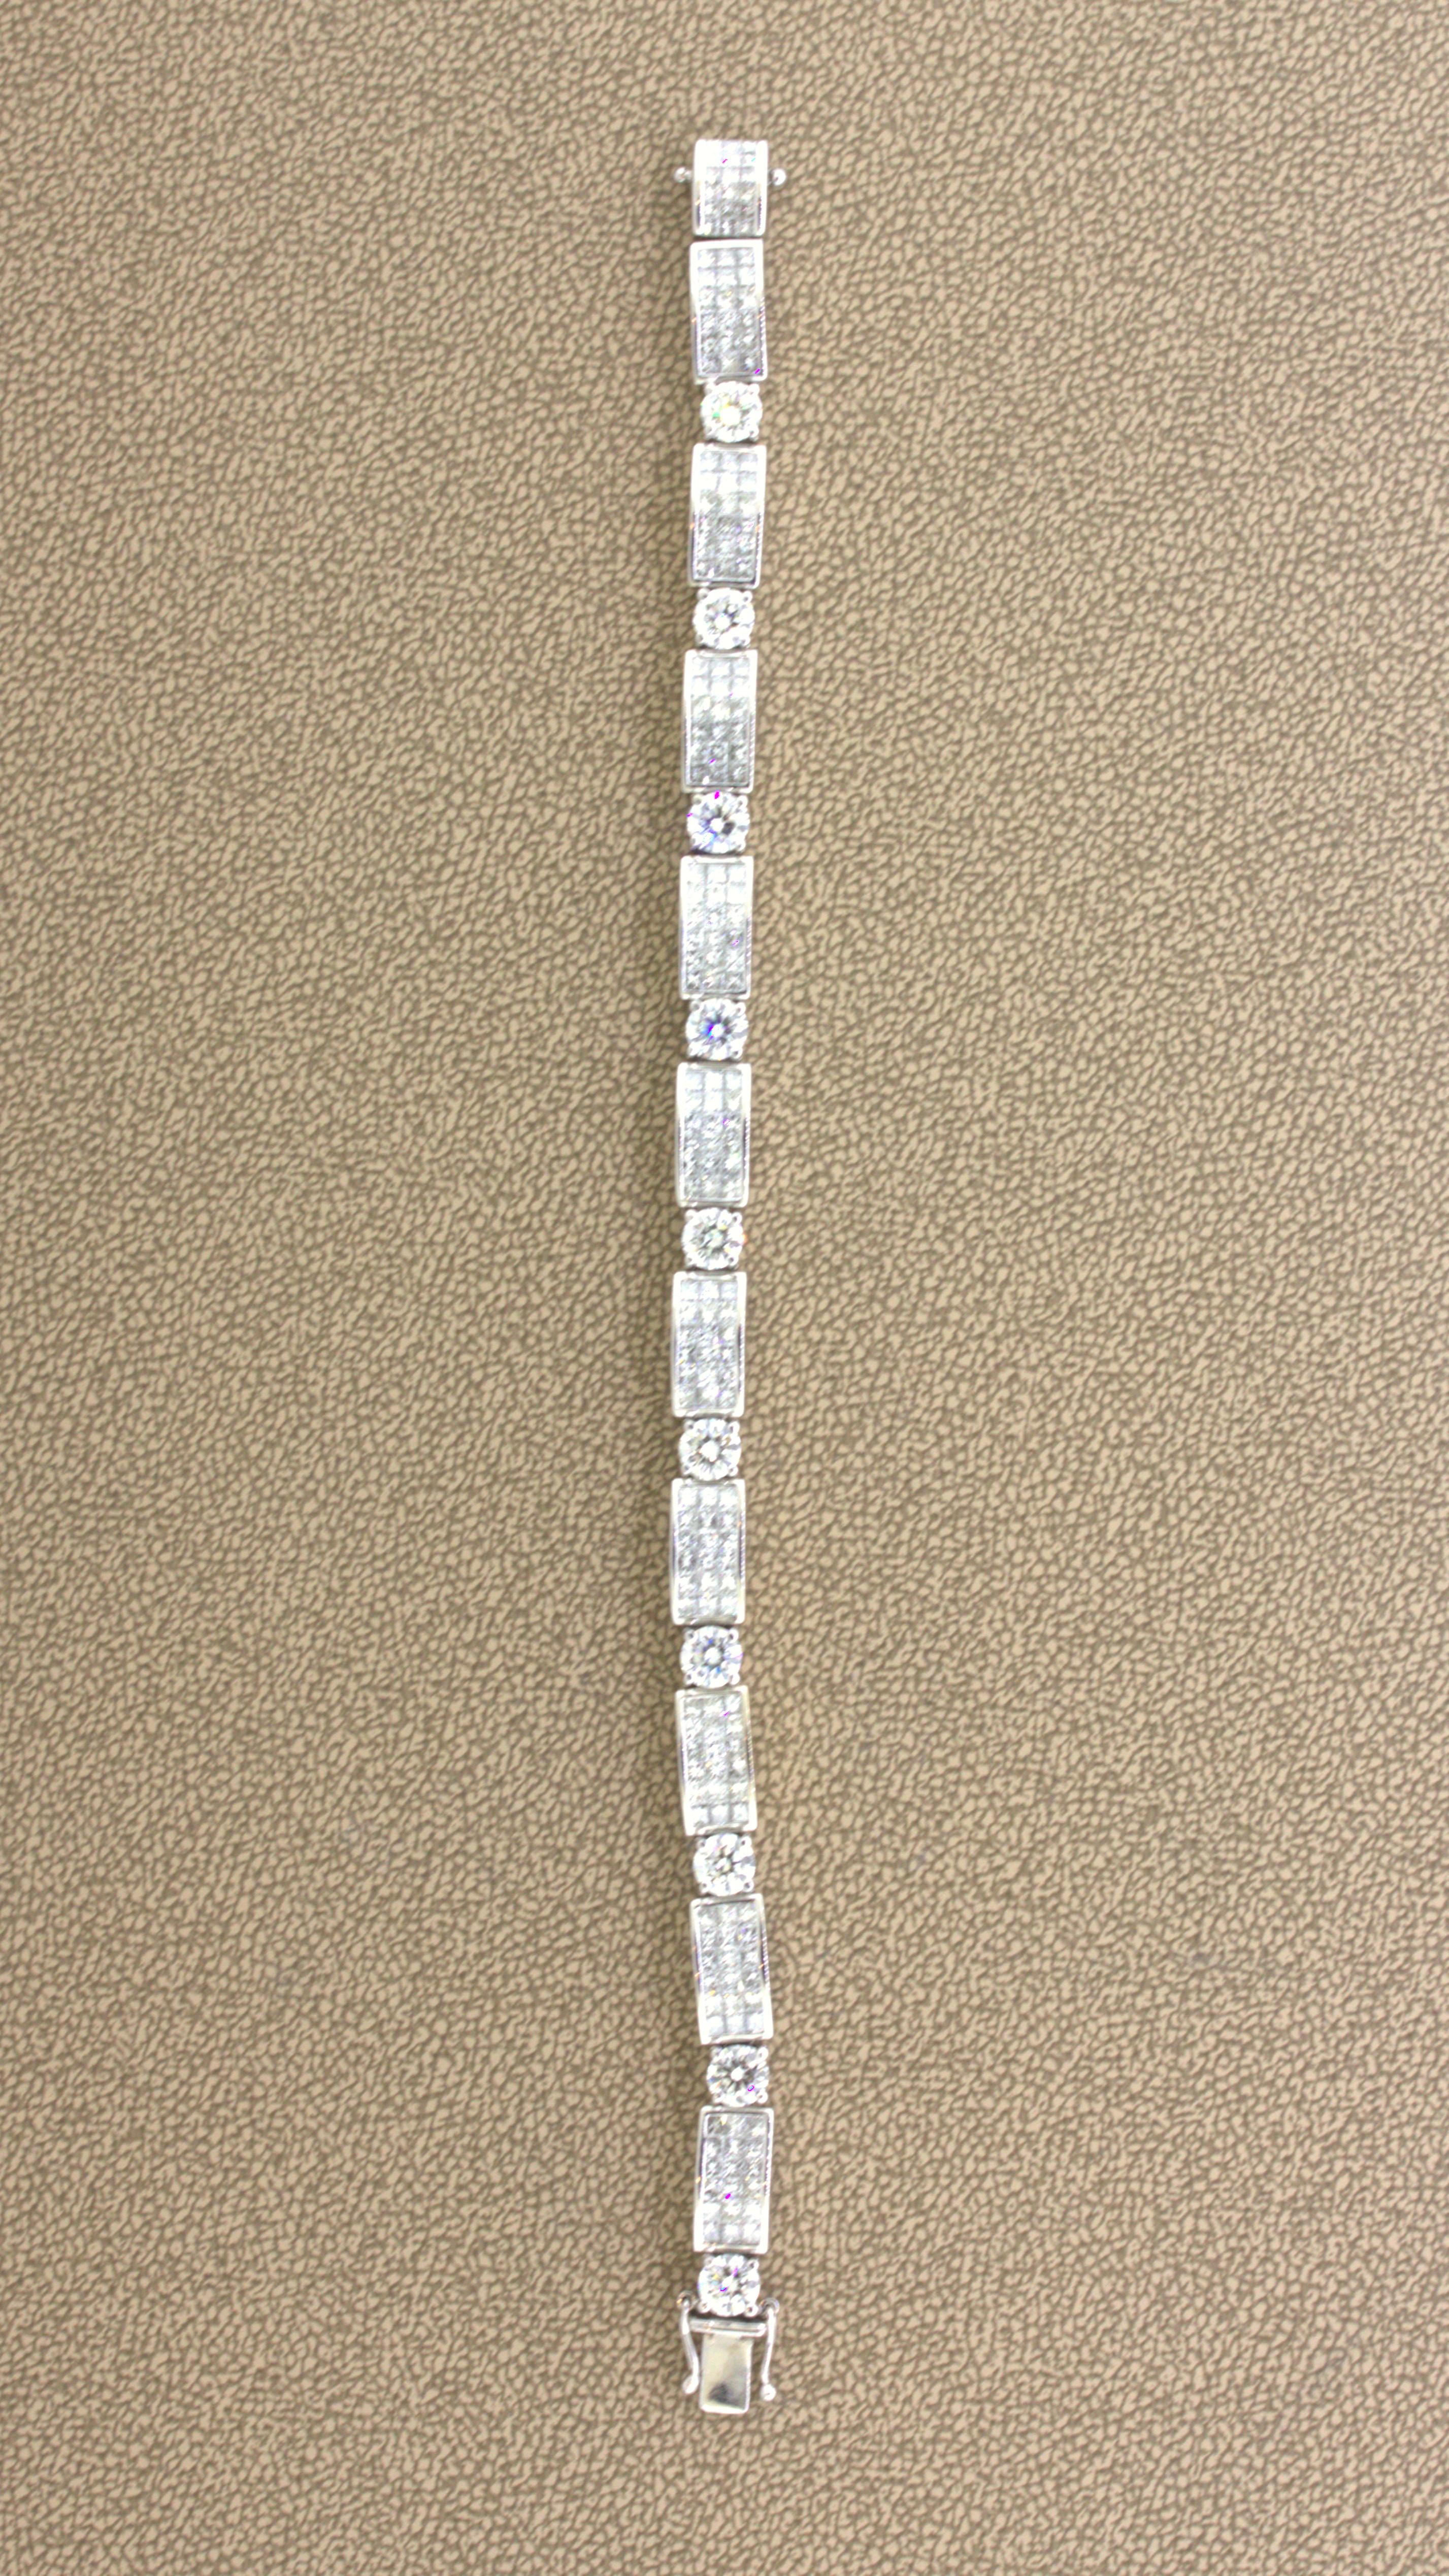 A sweet and stylish diamond bracelet featuring 10 large round brilliant-cut and smaller invisible-set princess-cut diamonds. The total diamond weight is 14.22 carats, and they have a clarity grade of VS1-VS2 and color grade of G-H. Very fine bright